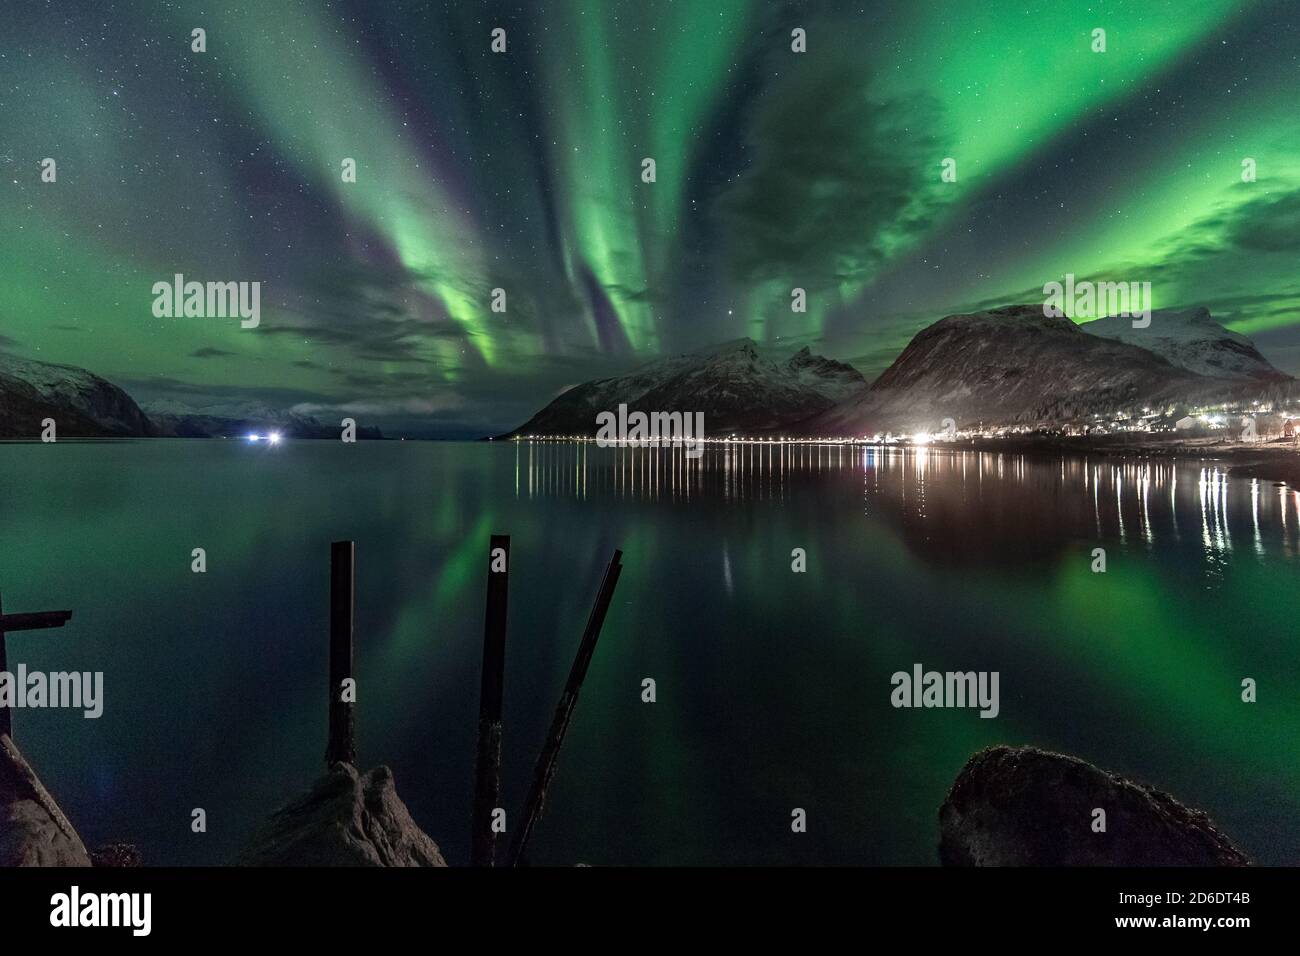 Northern lights / aurora borealis over Bergsbotn, a fjord on the island of  Senja in Norway Stock Photo - Alamy